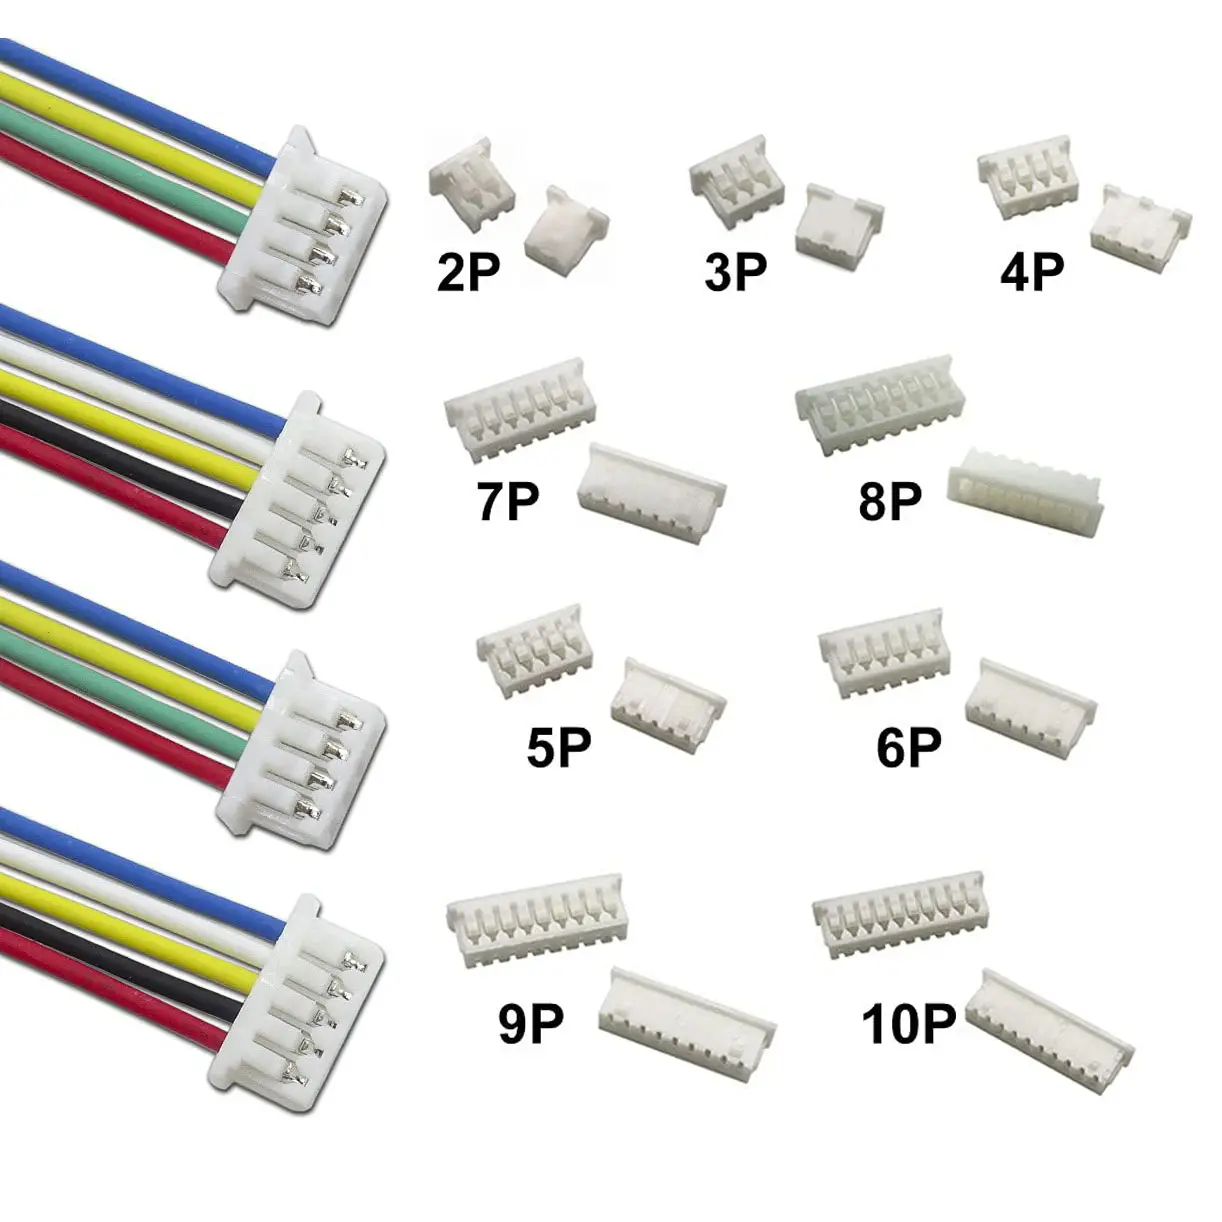 2pin-16pin Molex Connector 2.0mm pitch xh jst connector female 4 pin wire to board 2.54 ph wafer connector for pcb board